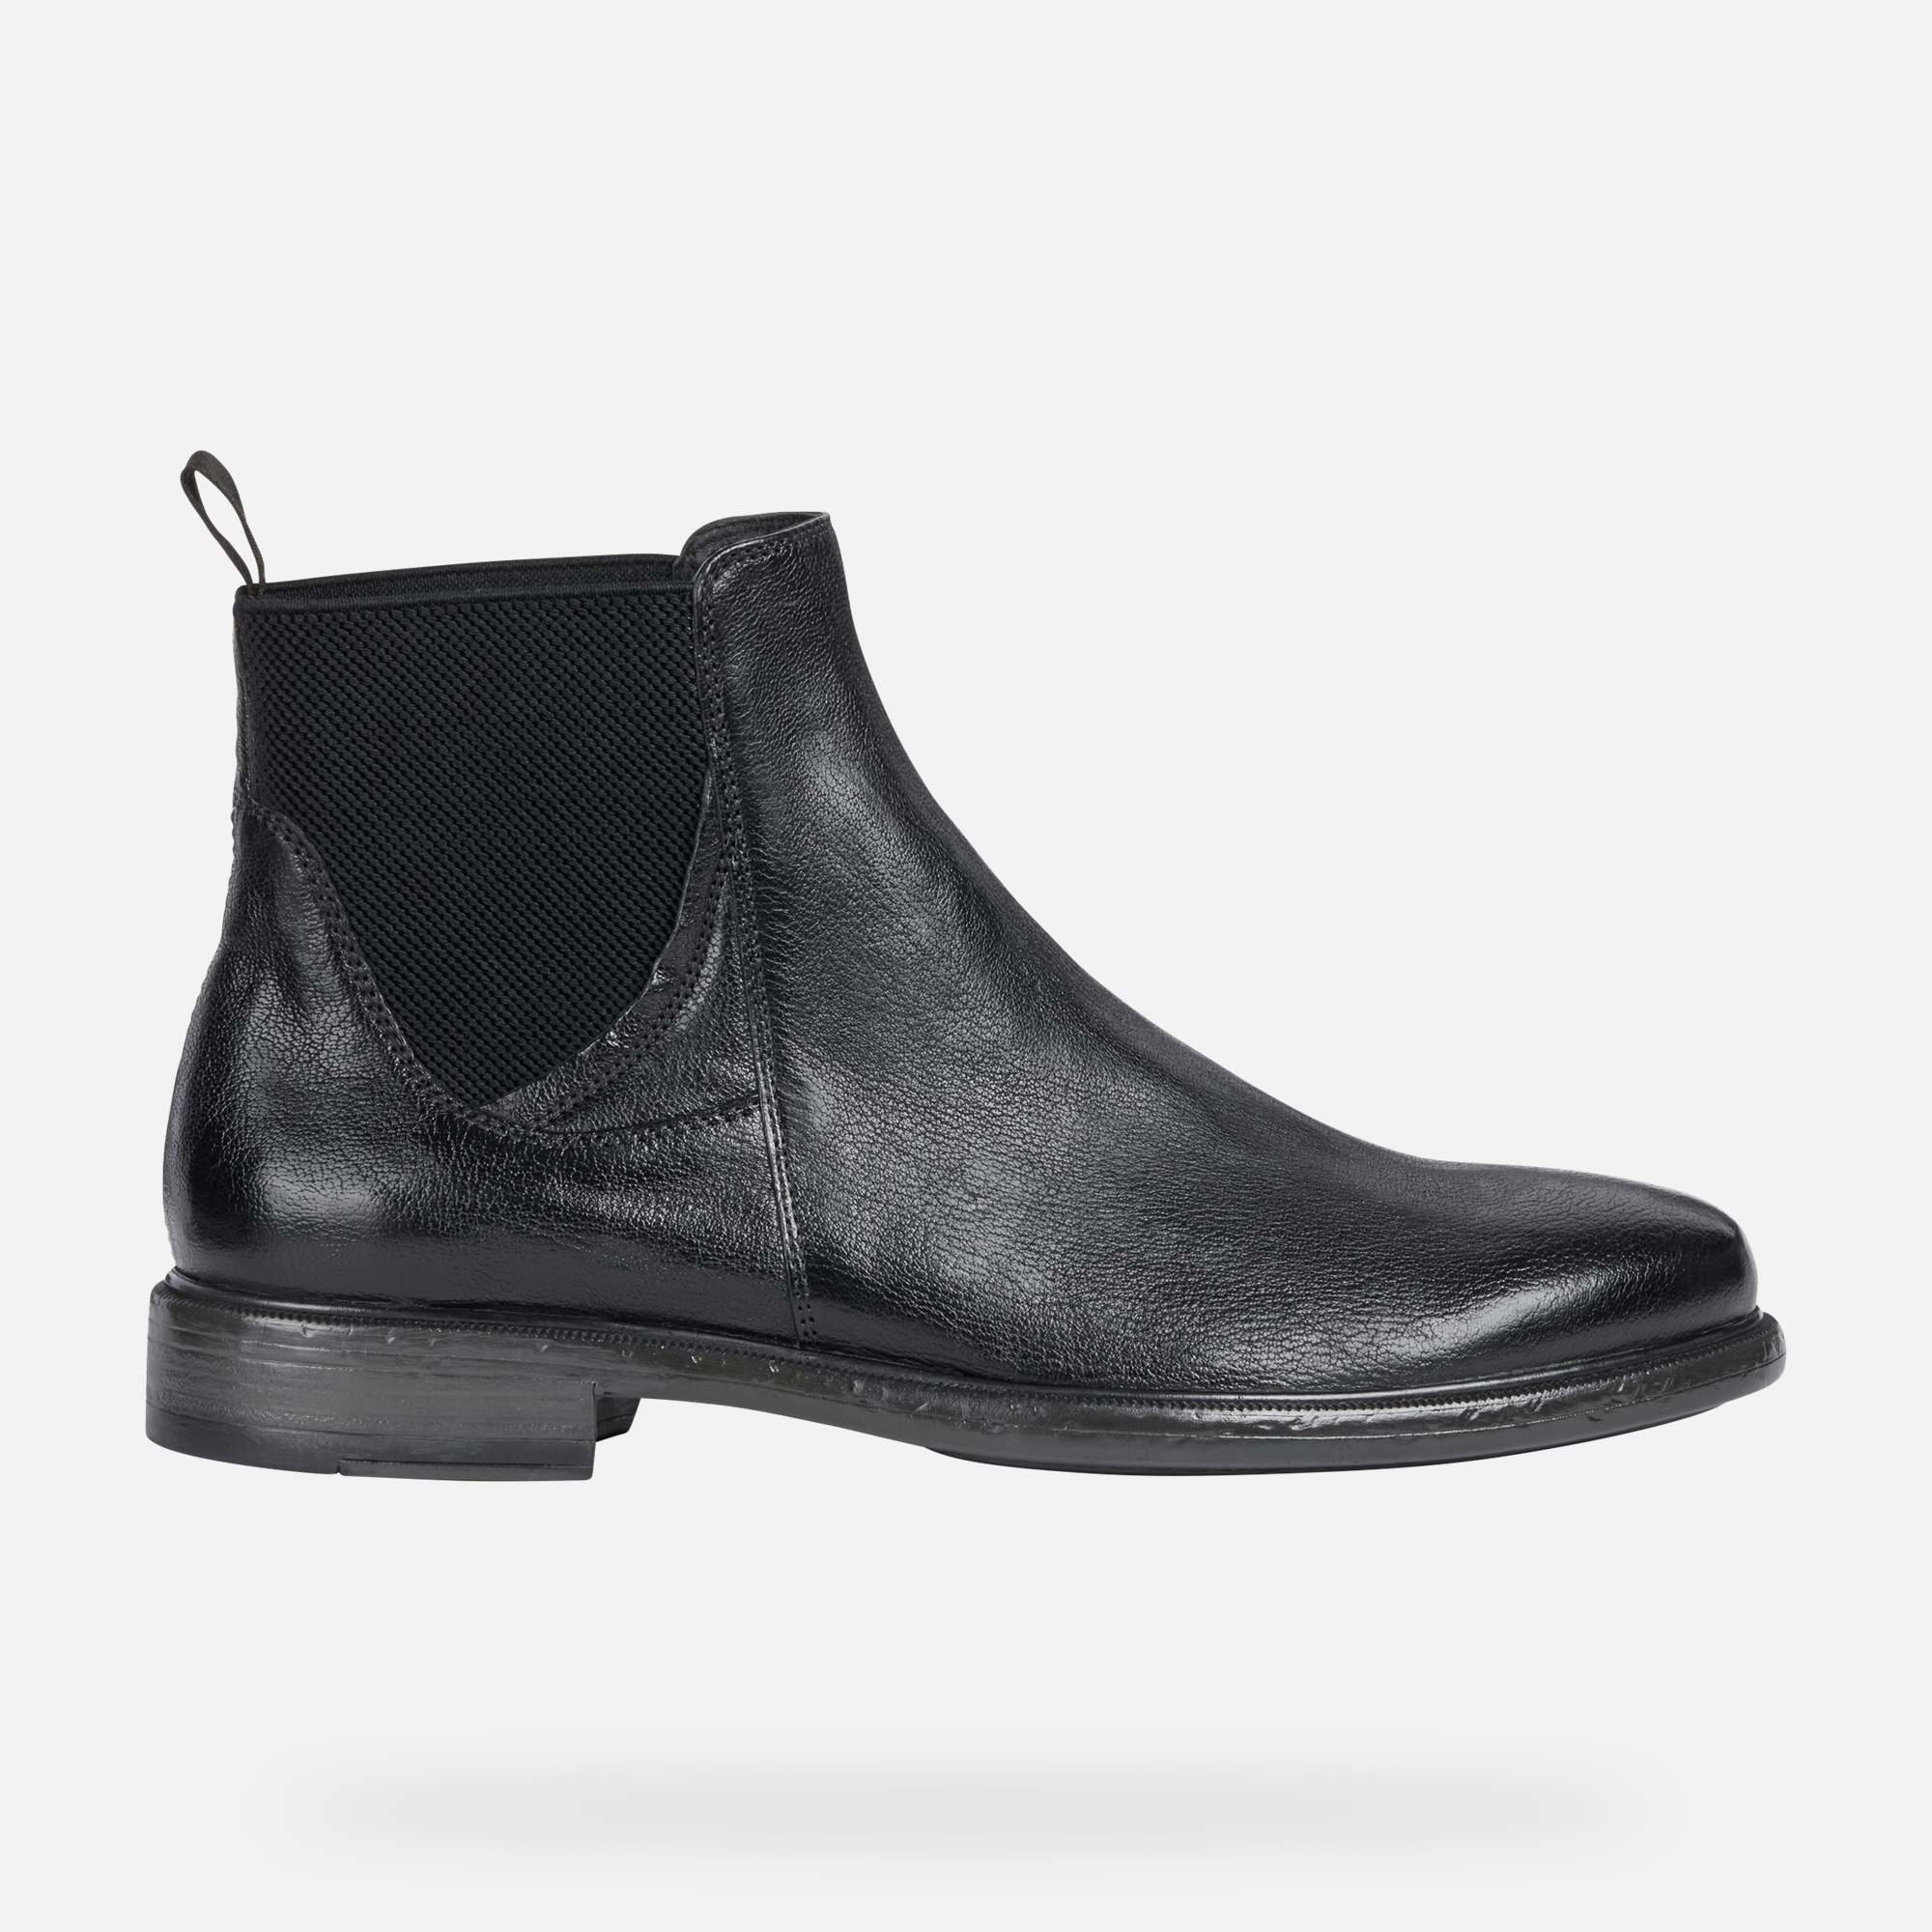 Geox TERENCE Man: Black Ankle Boots | Geox® Fall Winter